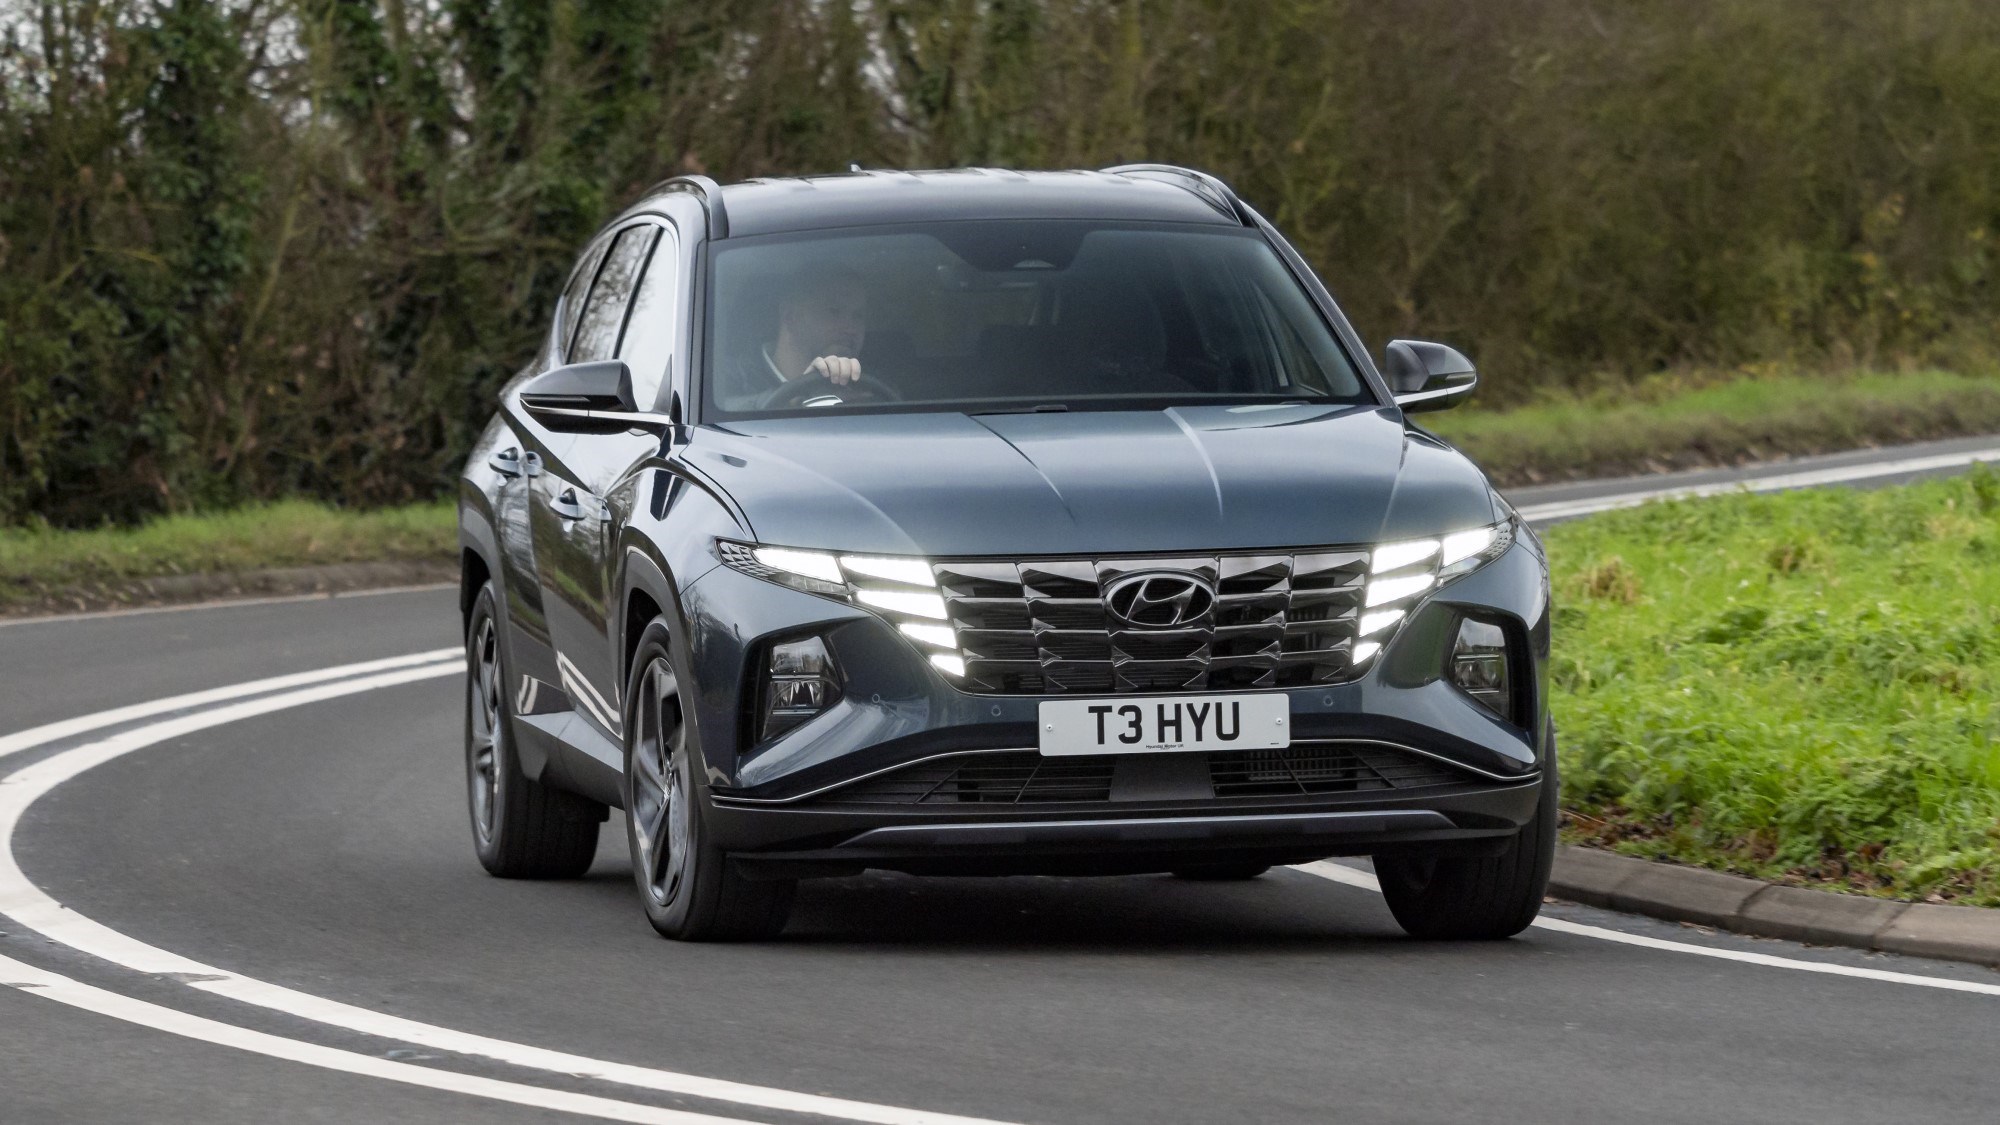 Does the 2022 Hyundai Tucson have a heads-up display?